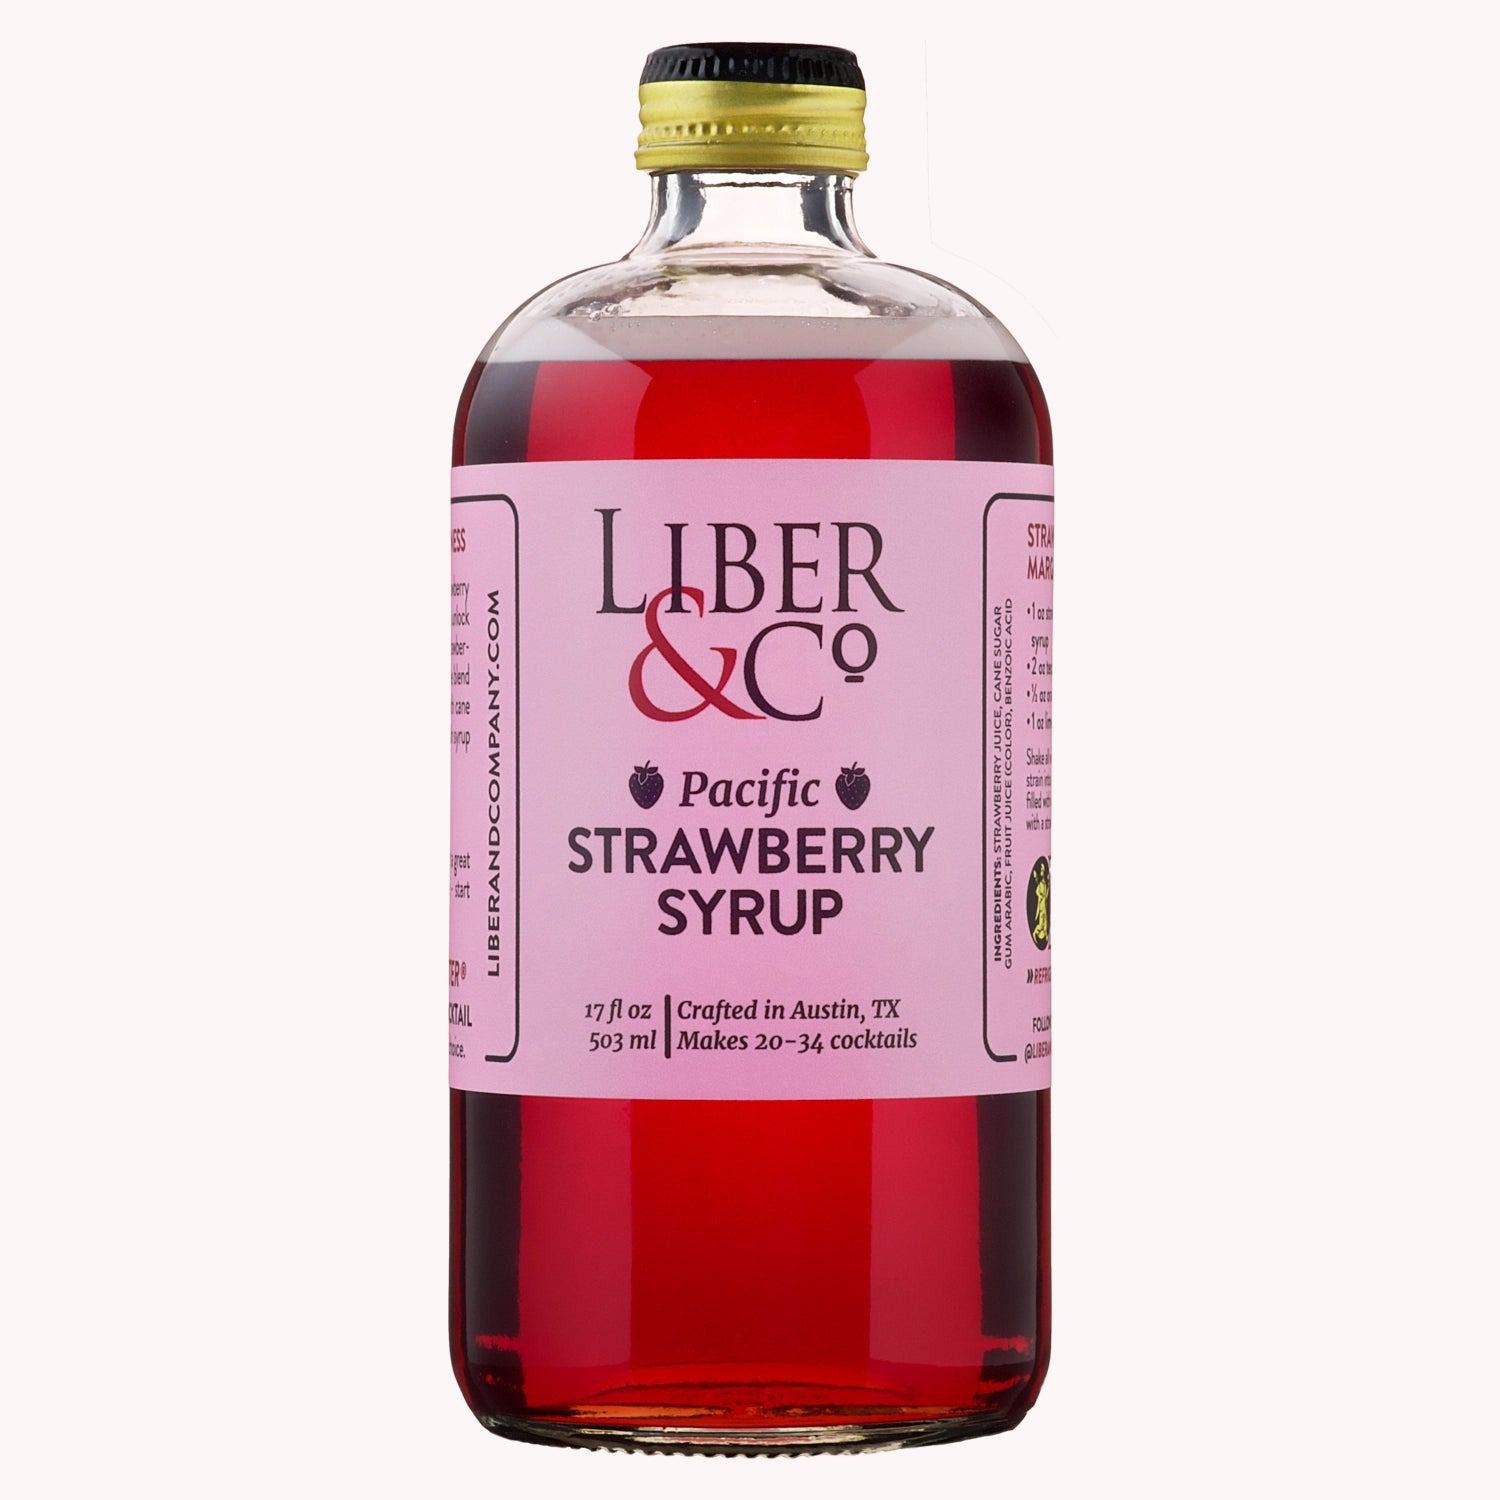 Pacific Strawberry Syrup